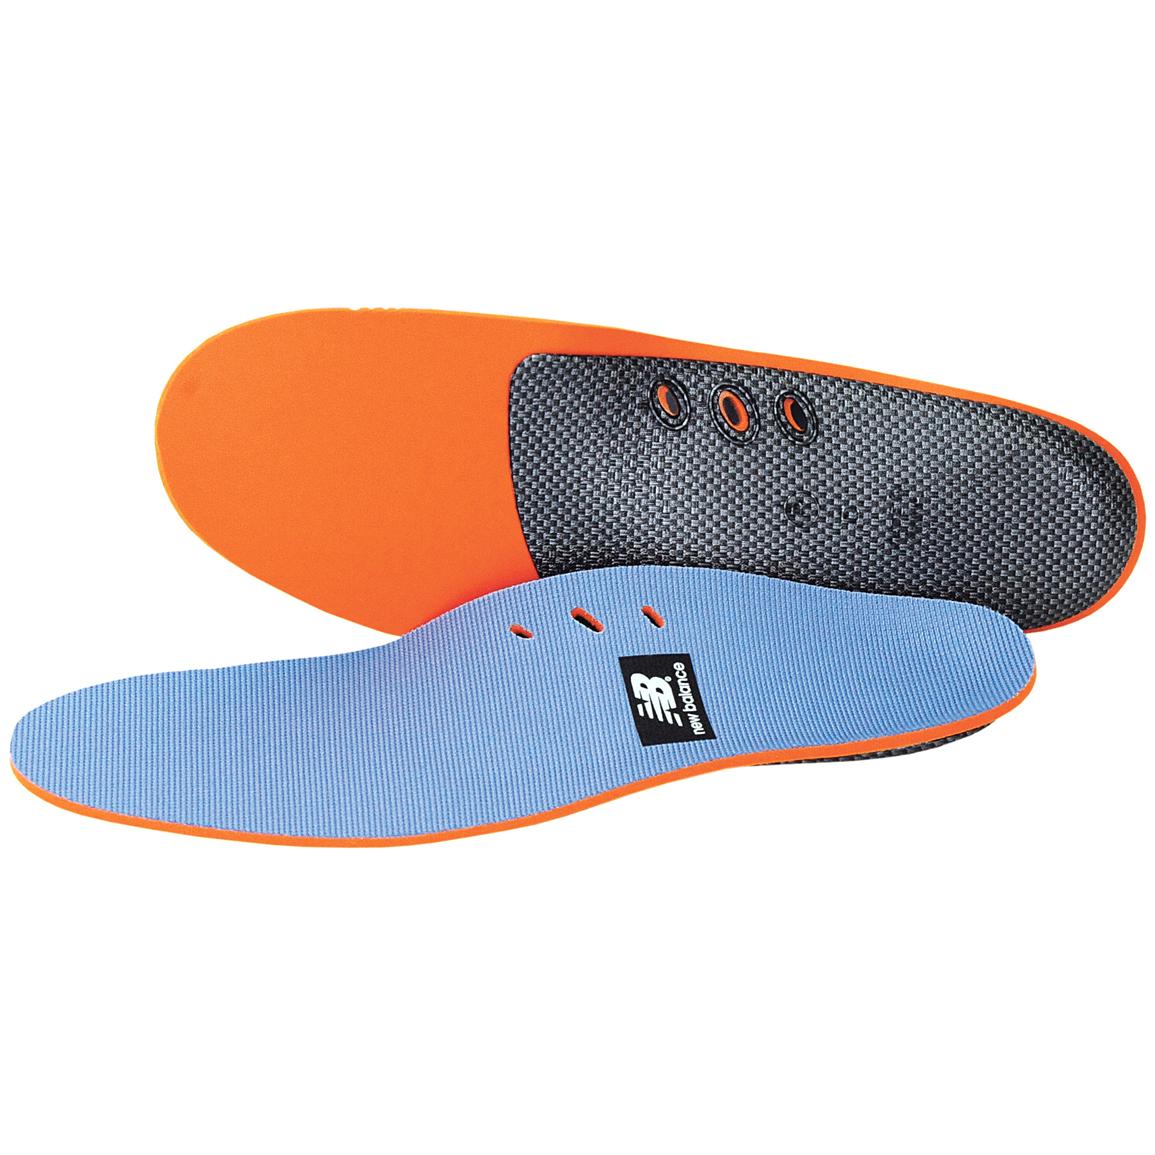 new balance insoles ias3720 stability insole